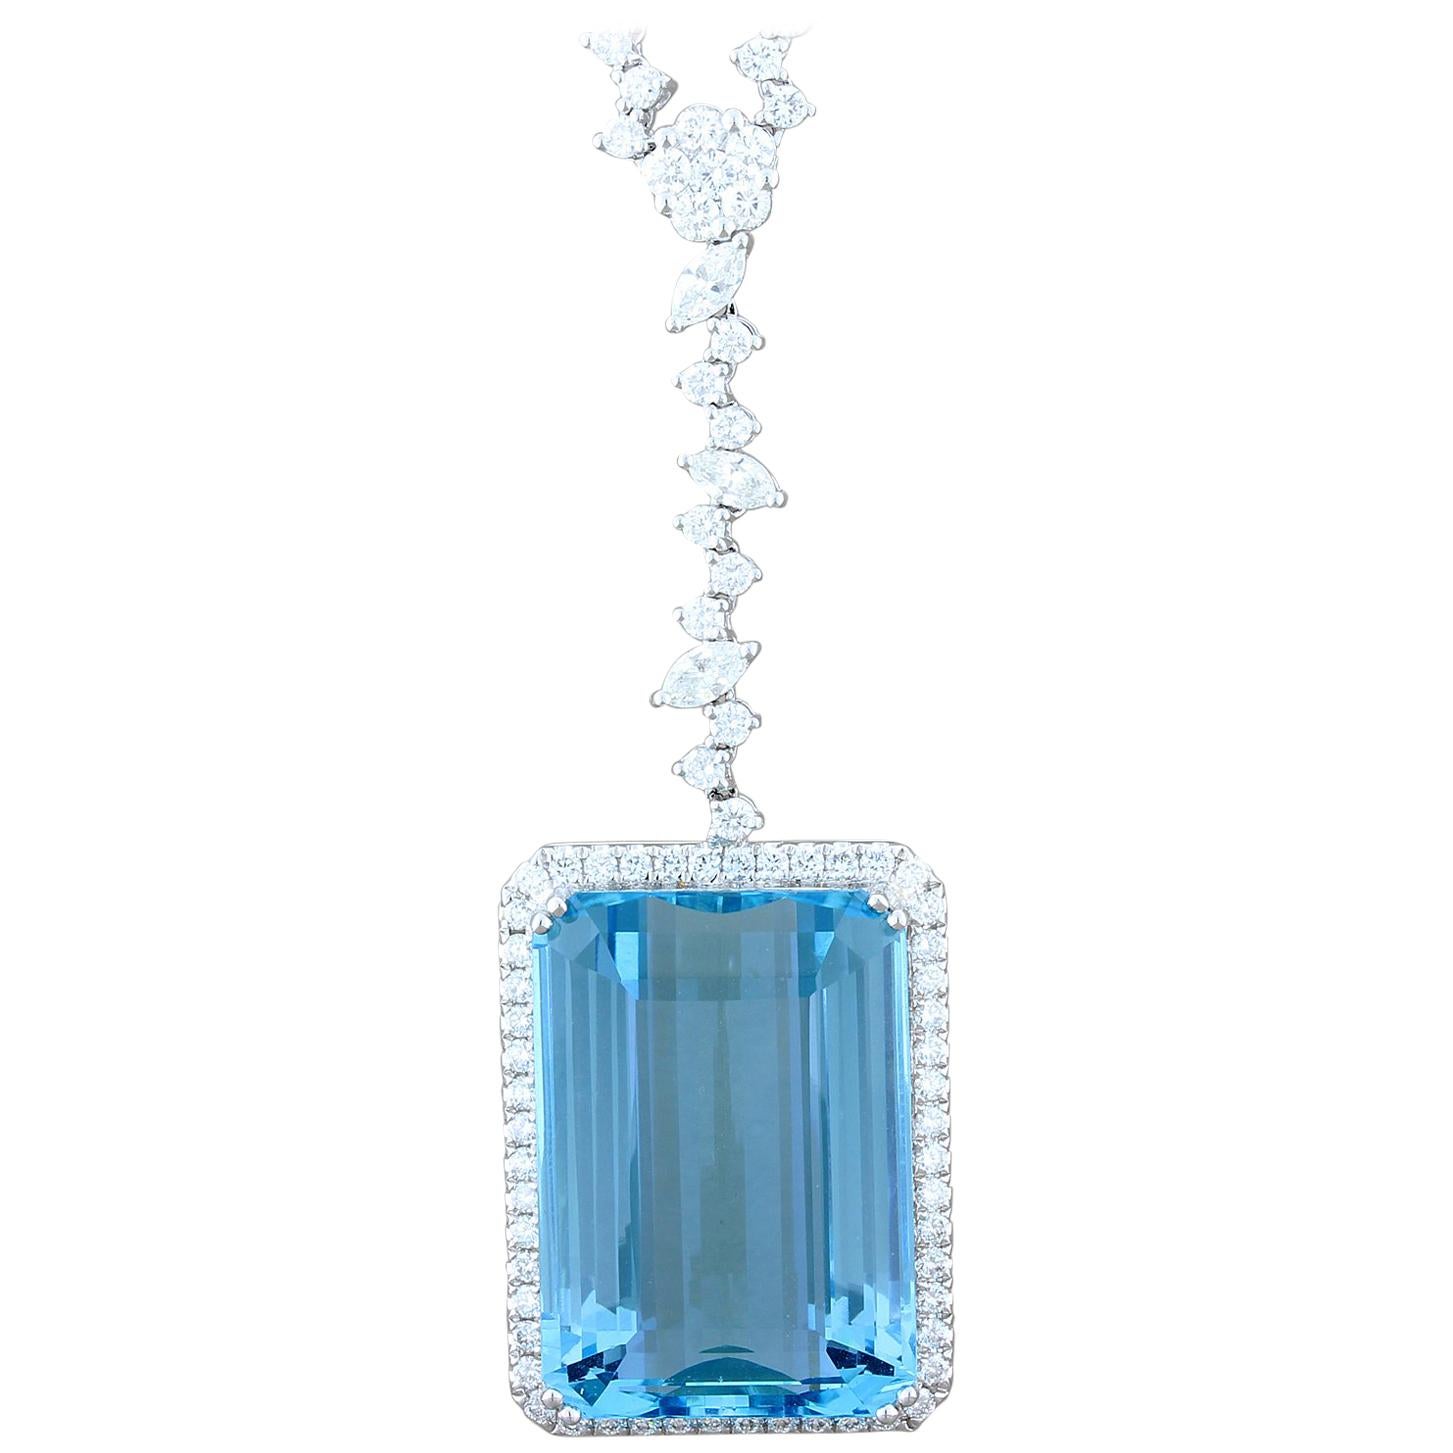 This breathtaking necklace features a fine 48.14 carat aquamarine. This aquamarine has the most sought after blue color. Being an emerald cut makes it even more special and desirable. The astounding aquamarine is haloed by 3.90 carats of VS quality